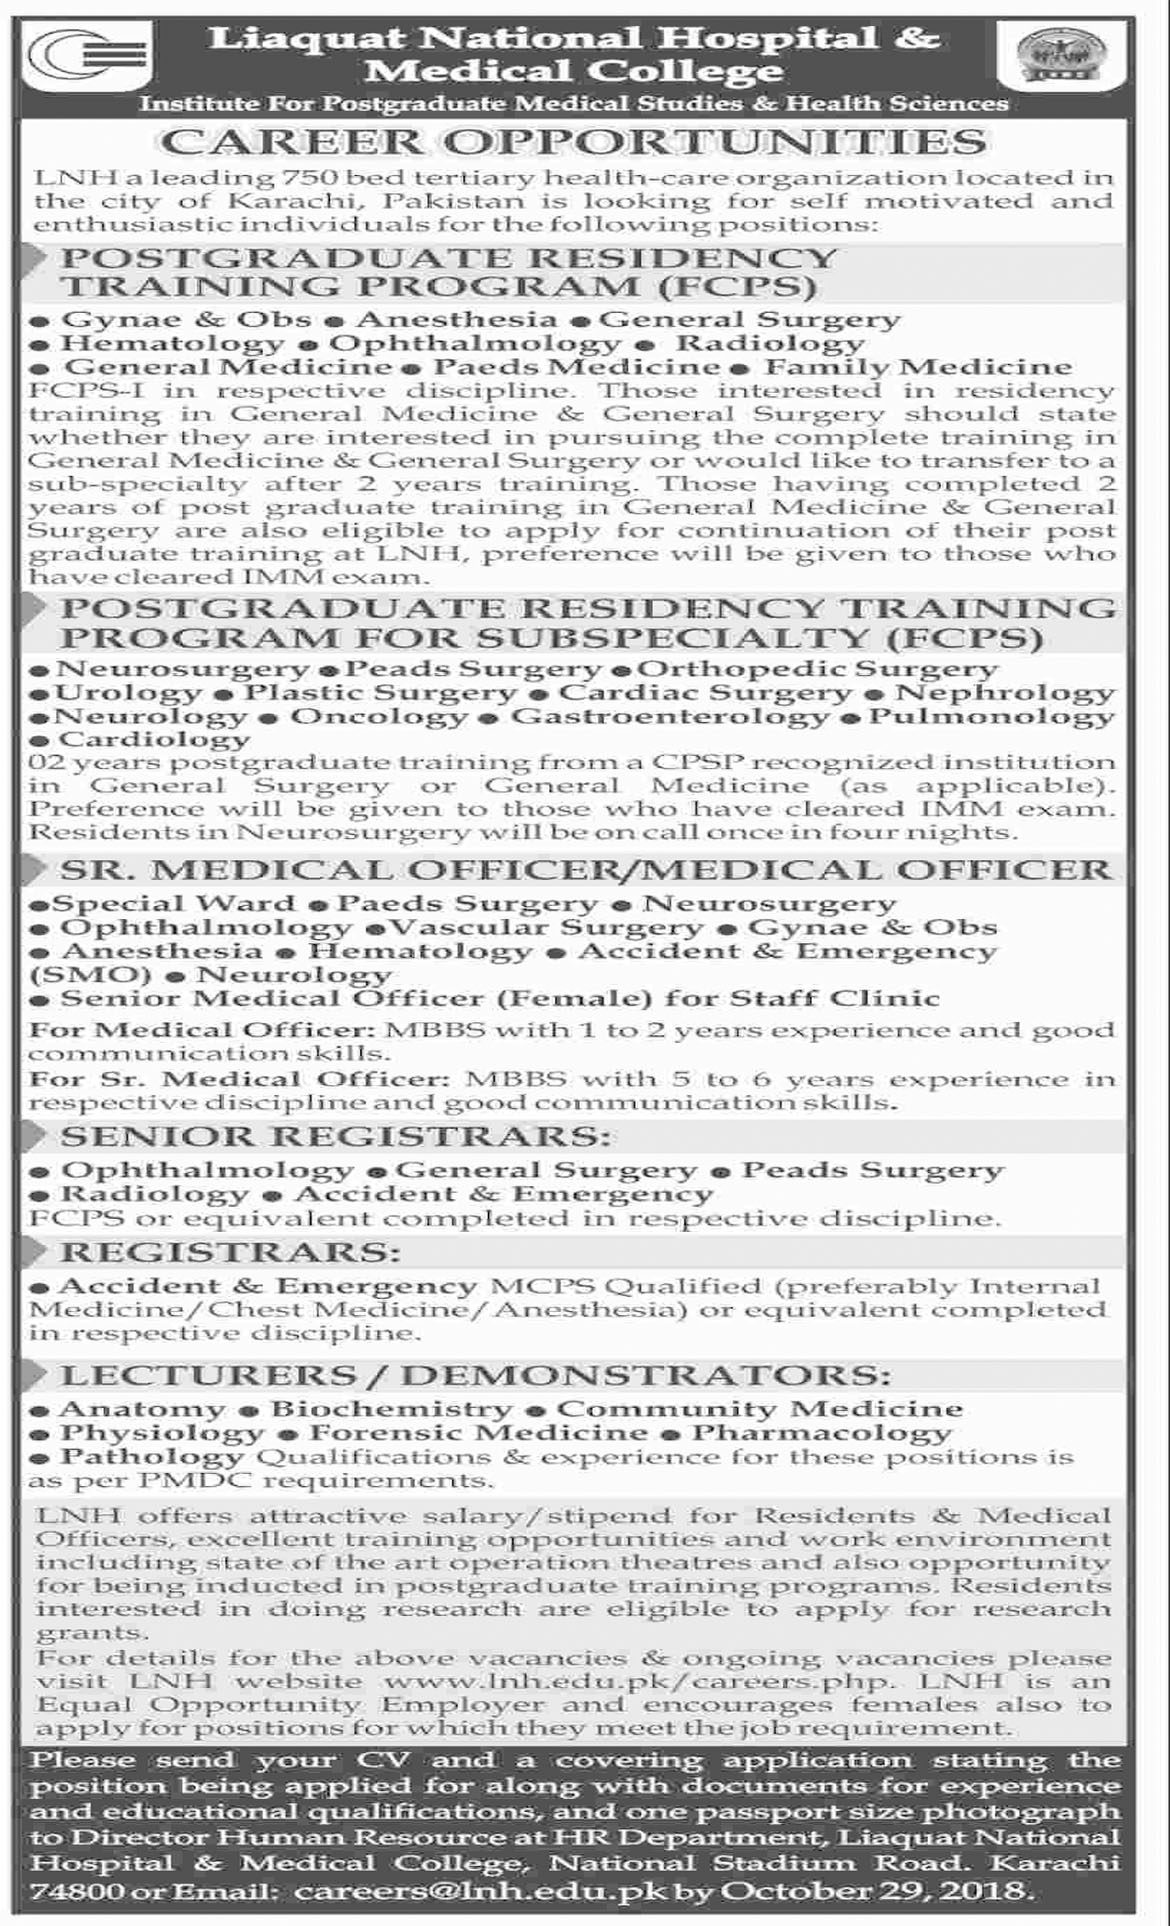 Jobs In Liaquat National Hospital And Medical College 22 Oct 2018